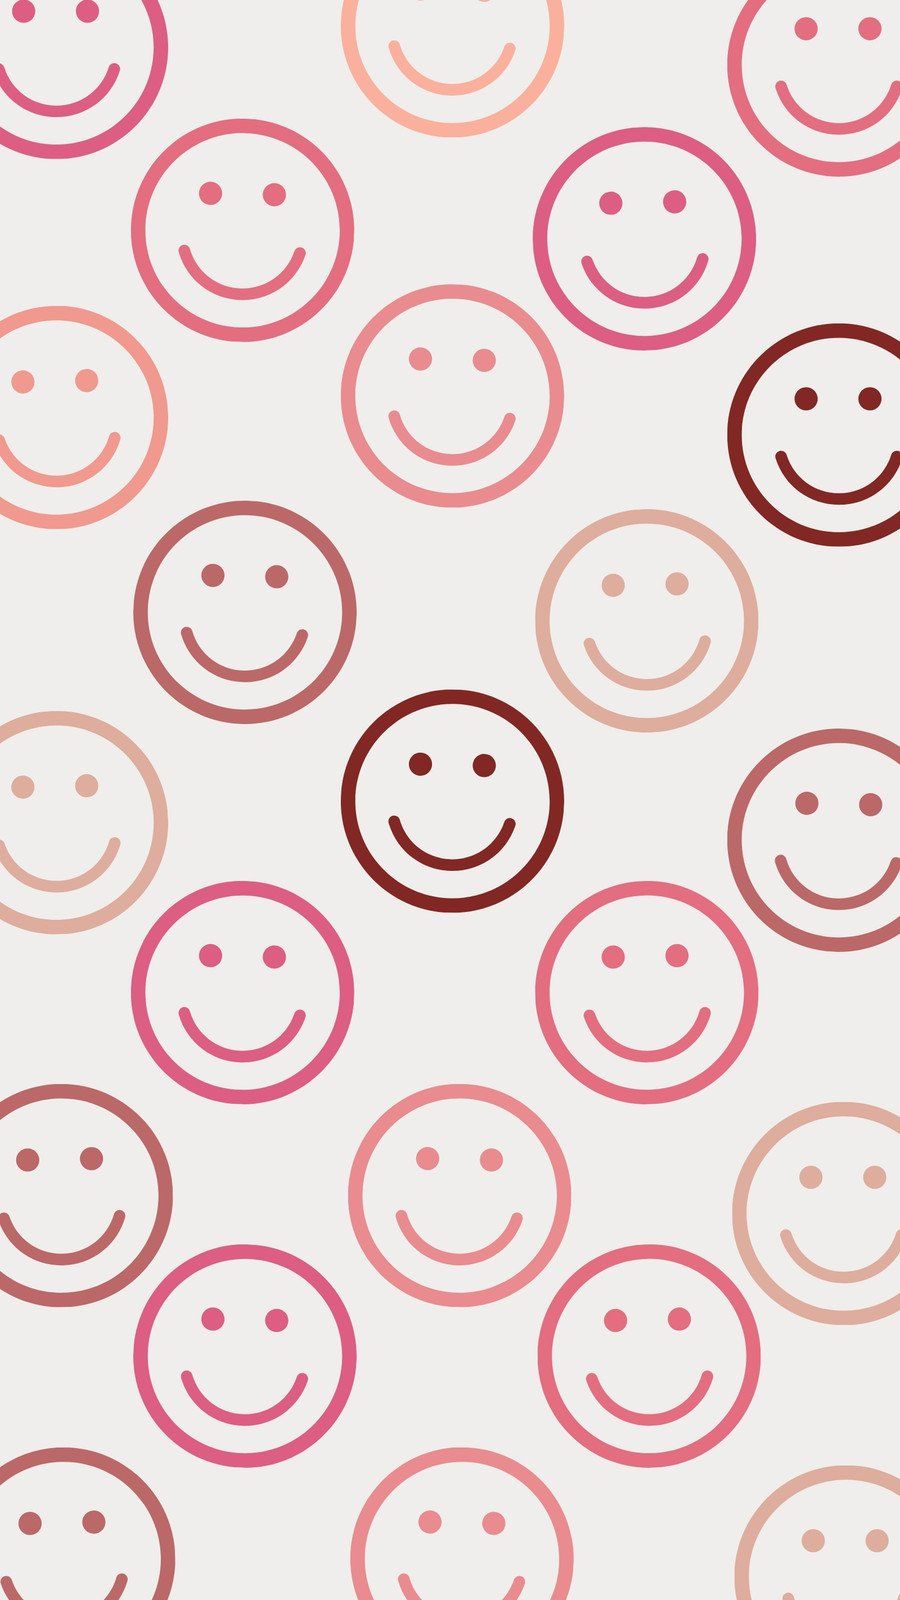 A pattern of smiley faces on white background - Smile, Smiley